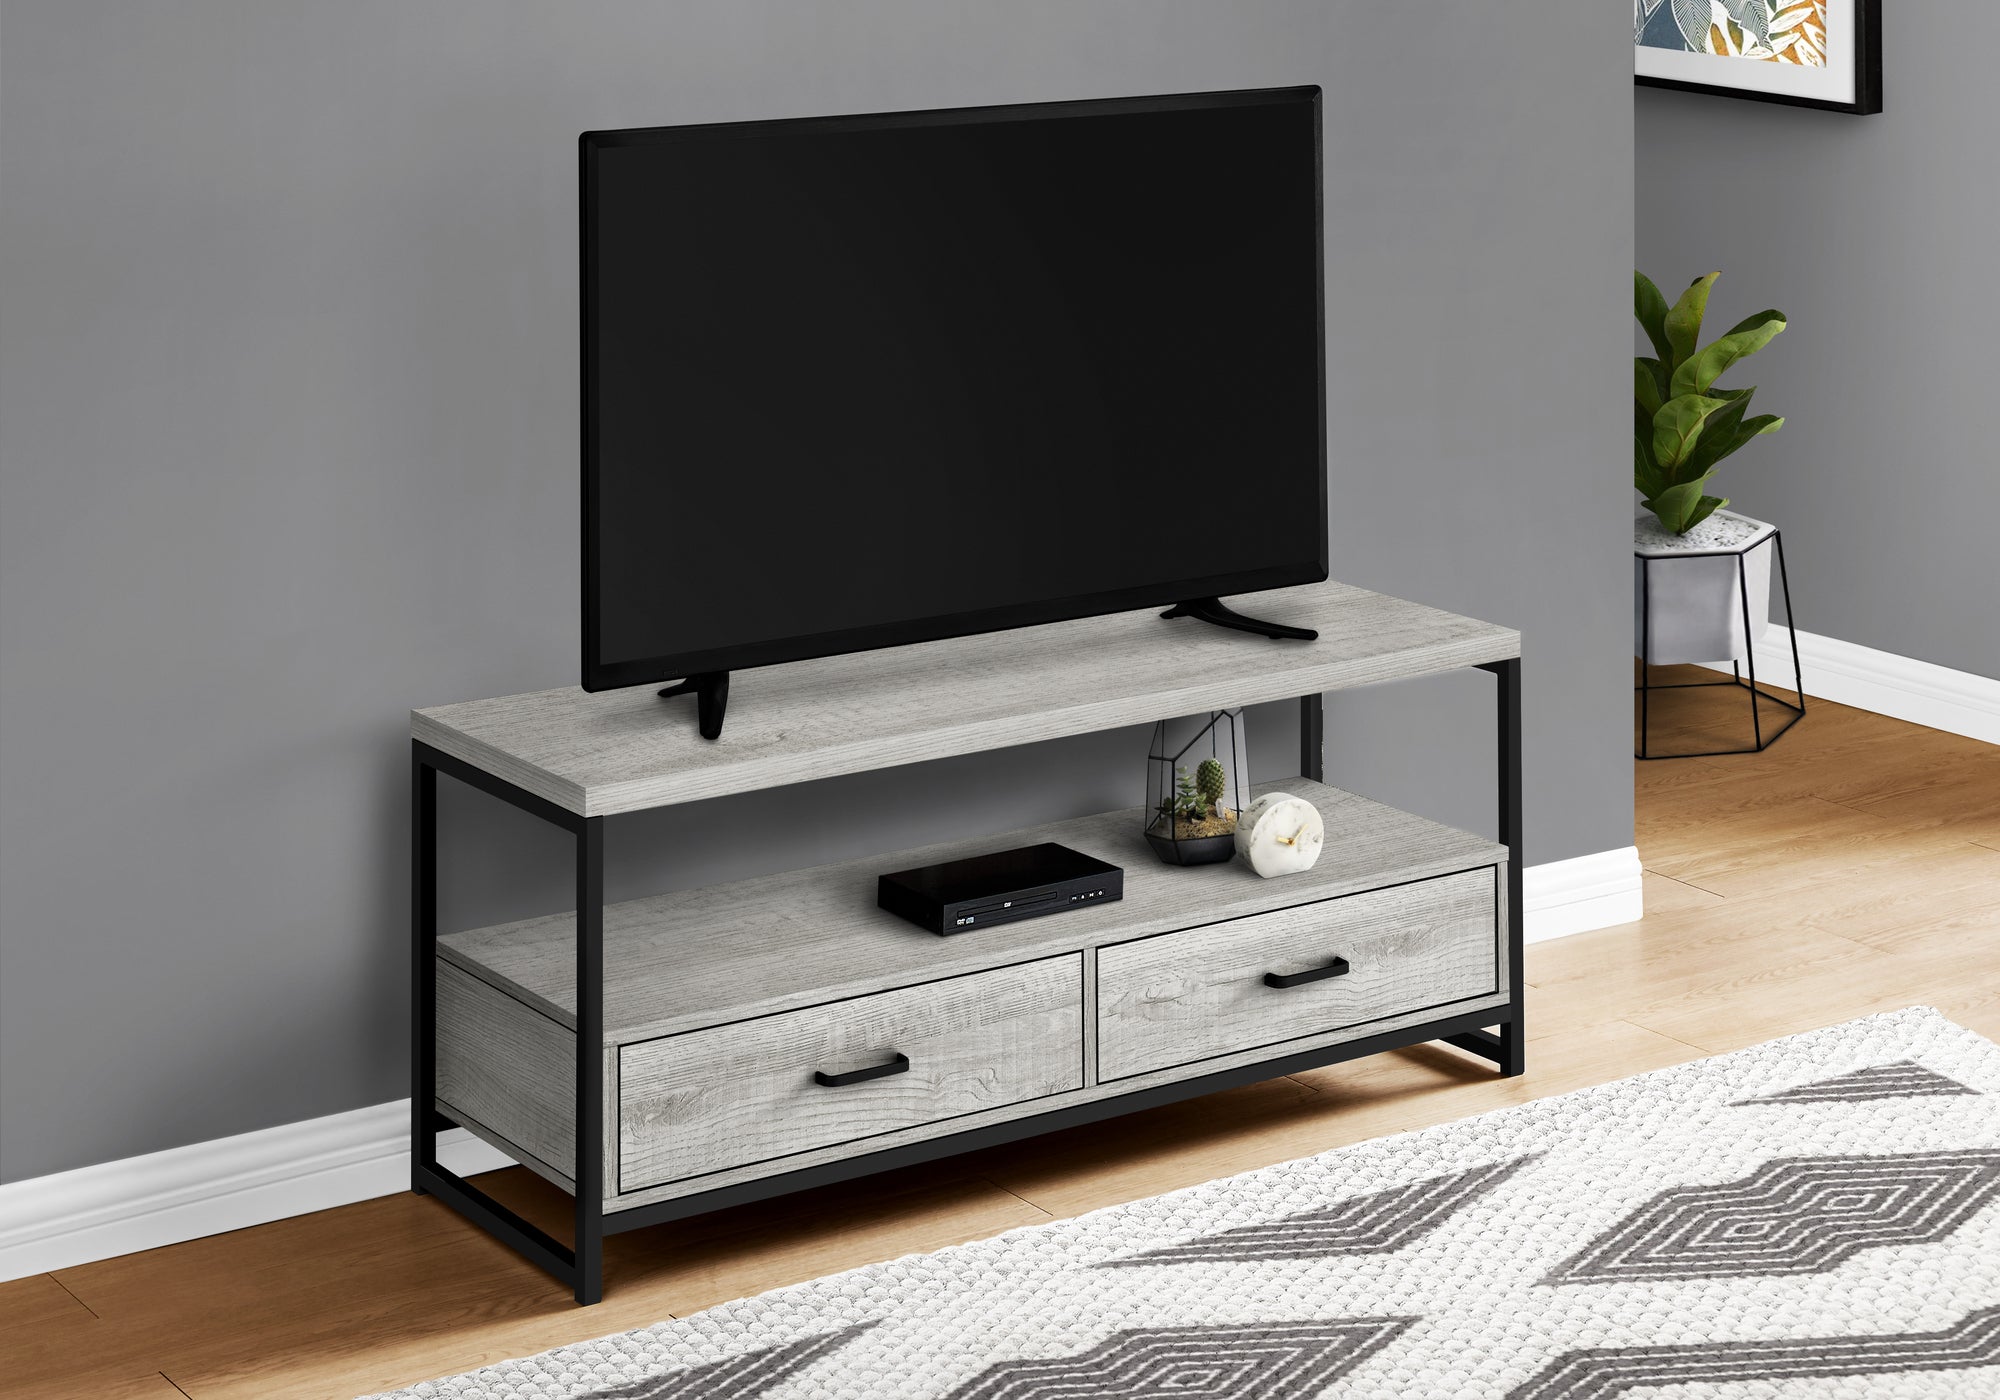 MN-682871    Tv Stand, 48 Inch, Console, Media Entertainment Center, Storage Cabinet, Living Room, Bedroom, Laminate, Metal, Grey, Contemporary, Modern